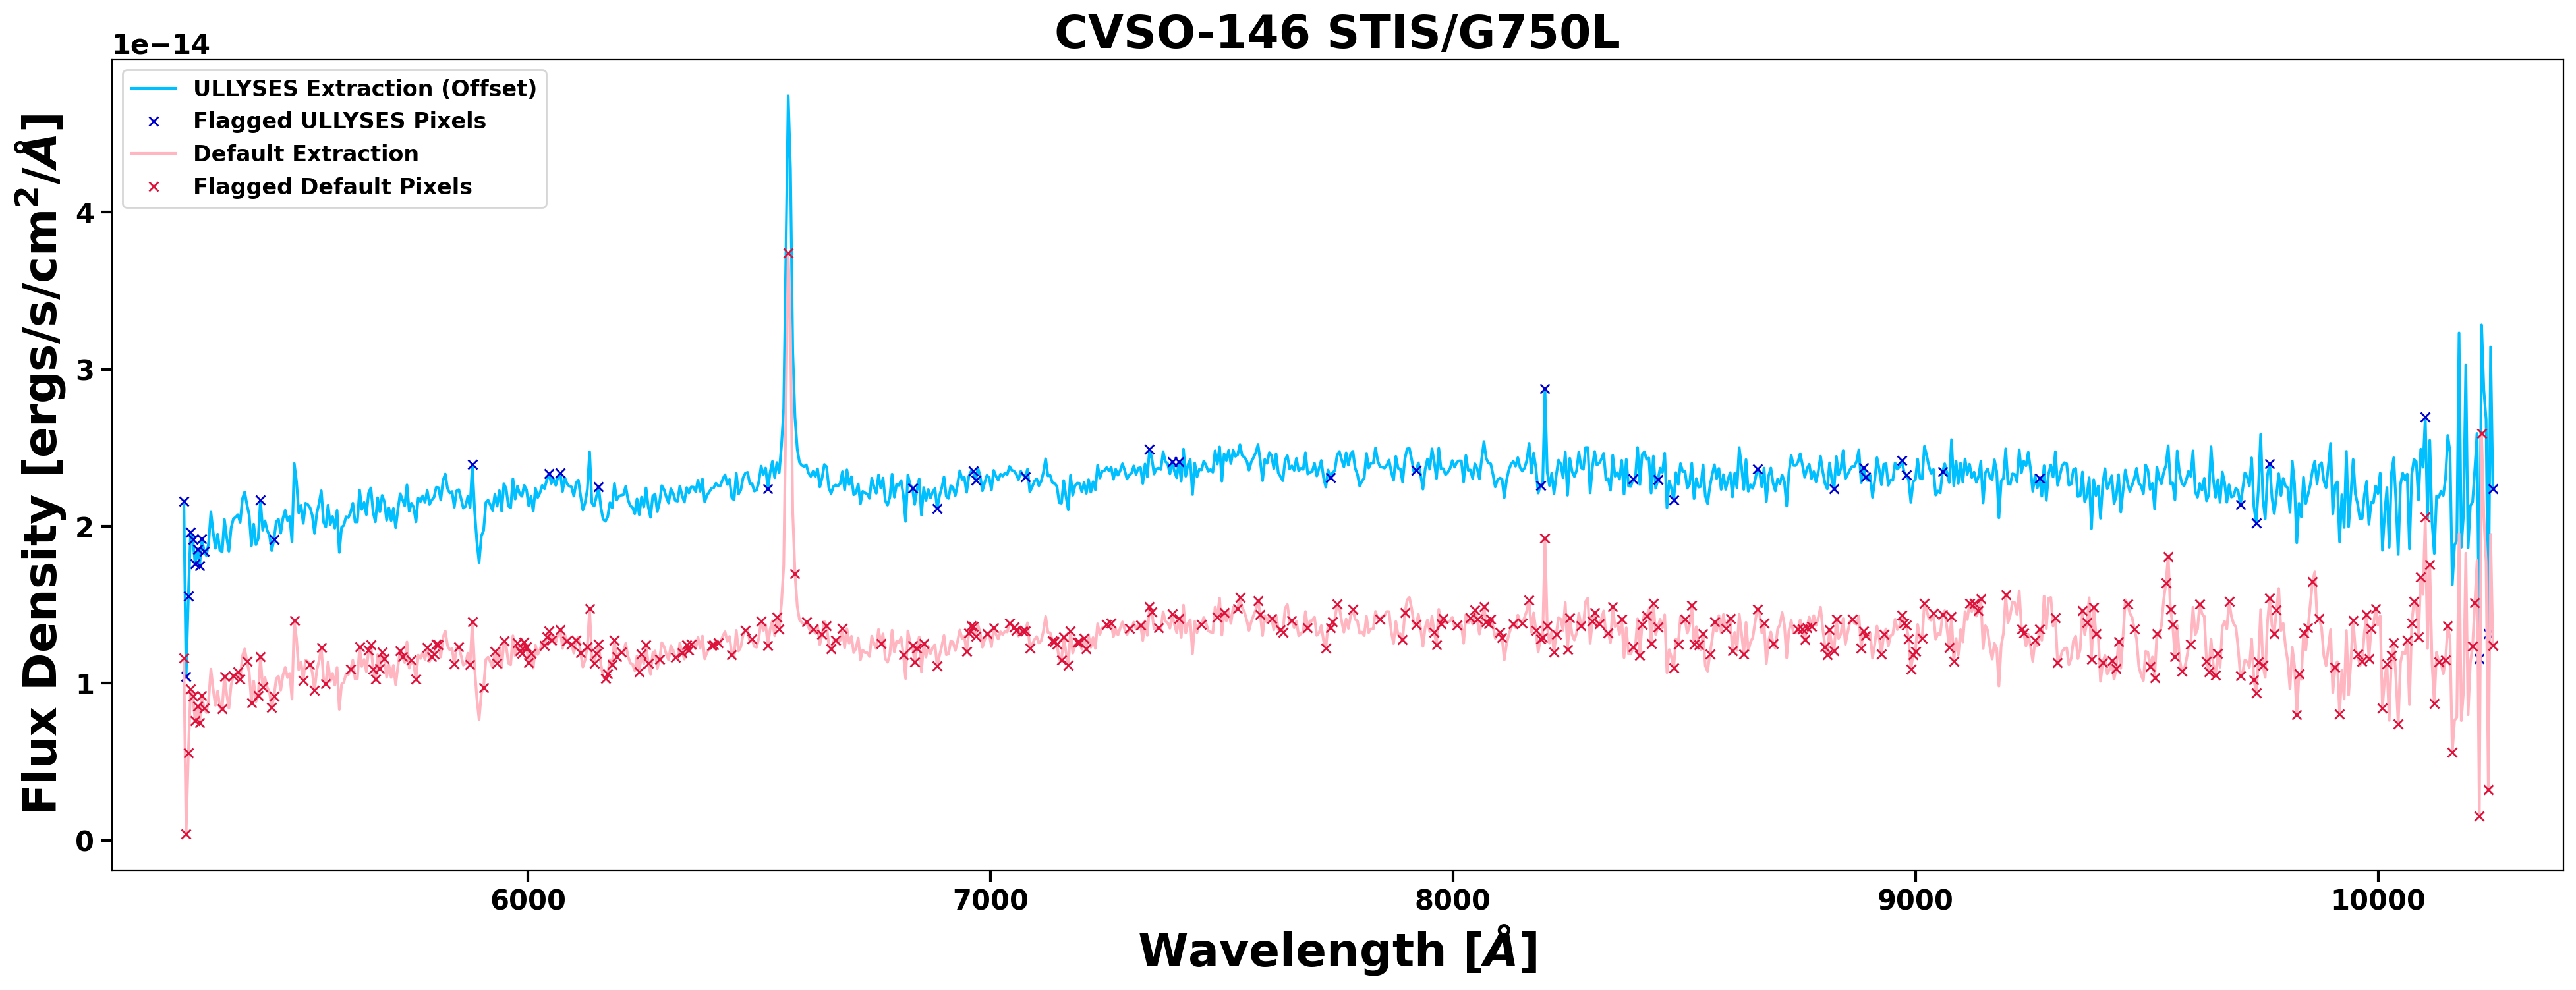 Two spectra are shown that are offset by about 1x10^-14 ergs/s/cm^2/Angstrom from each other.